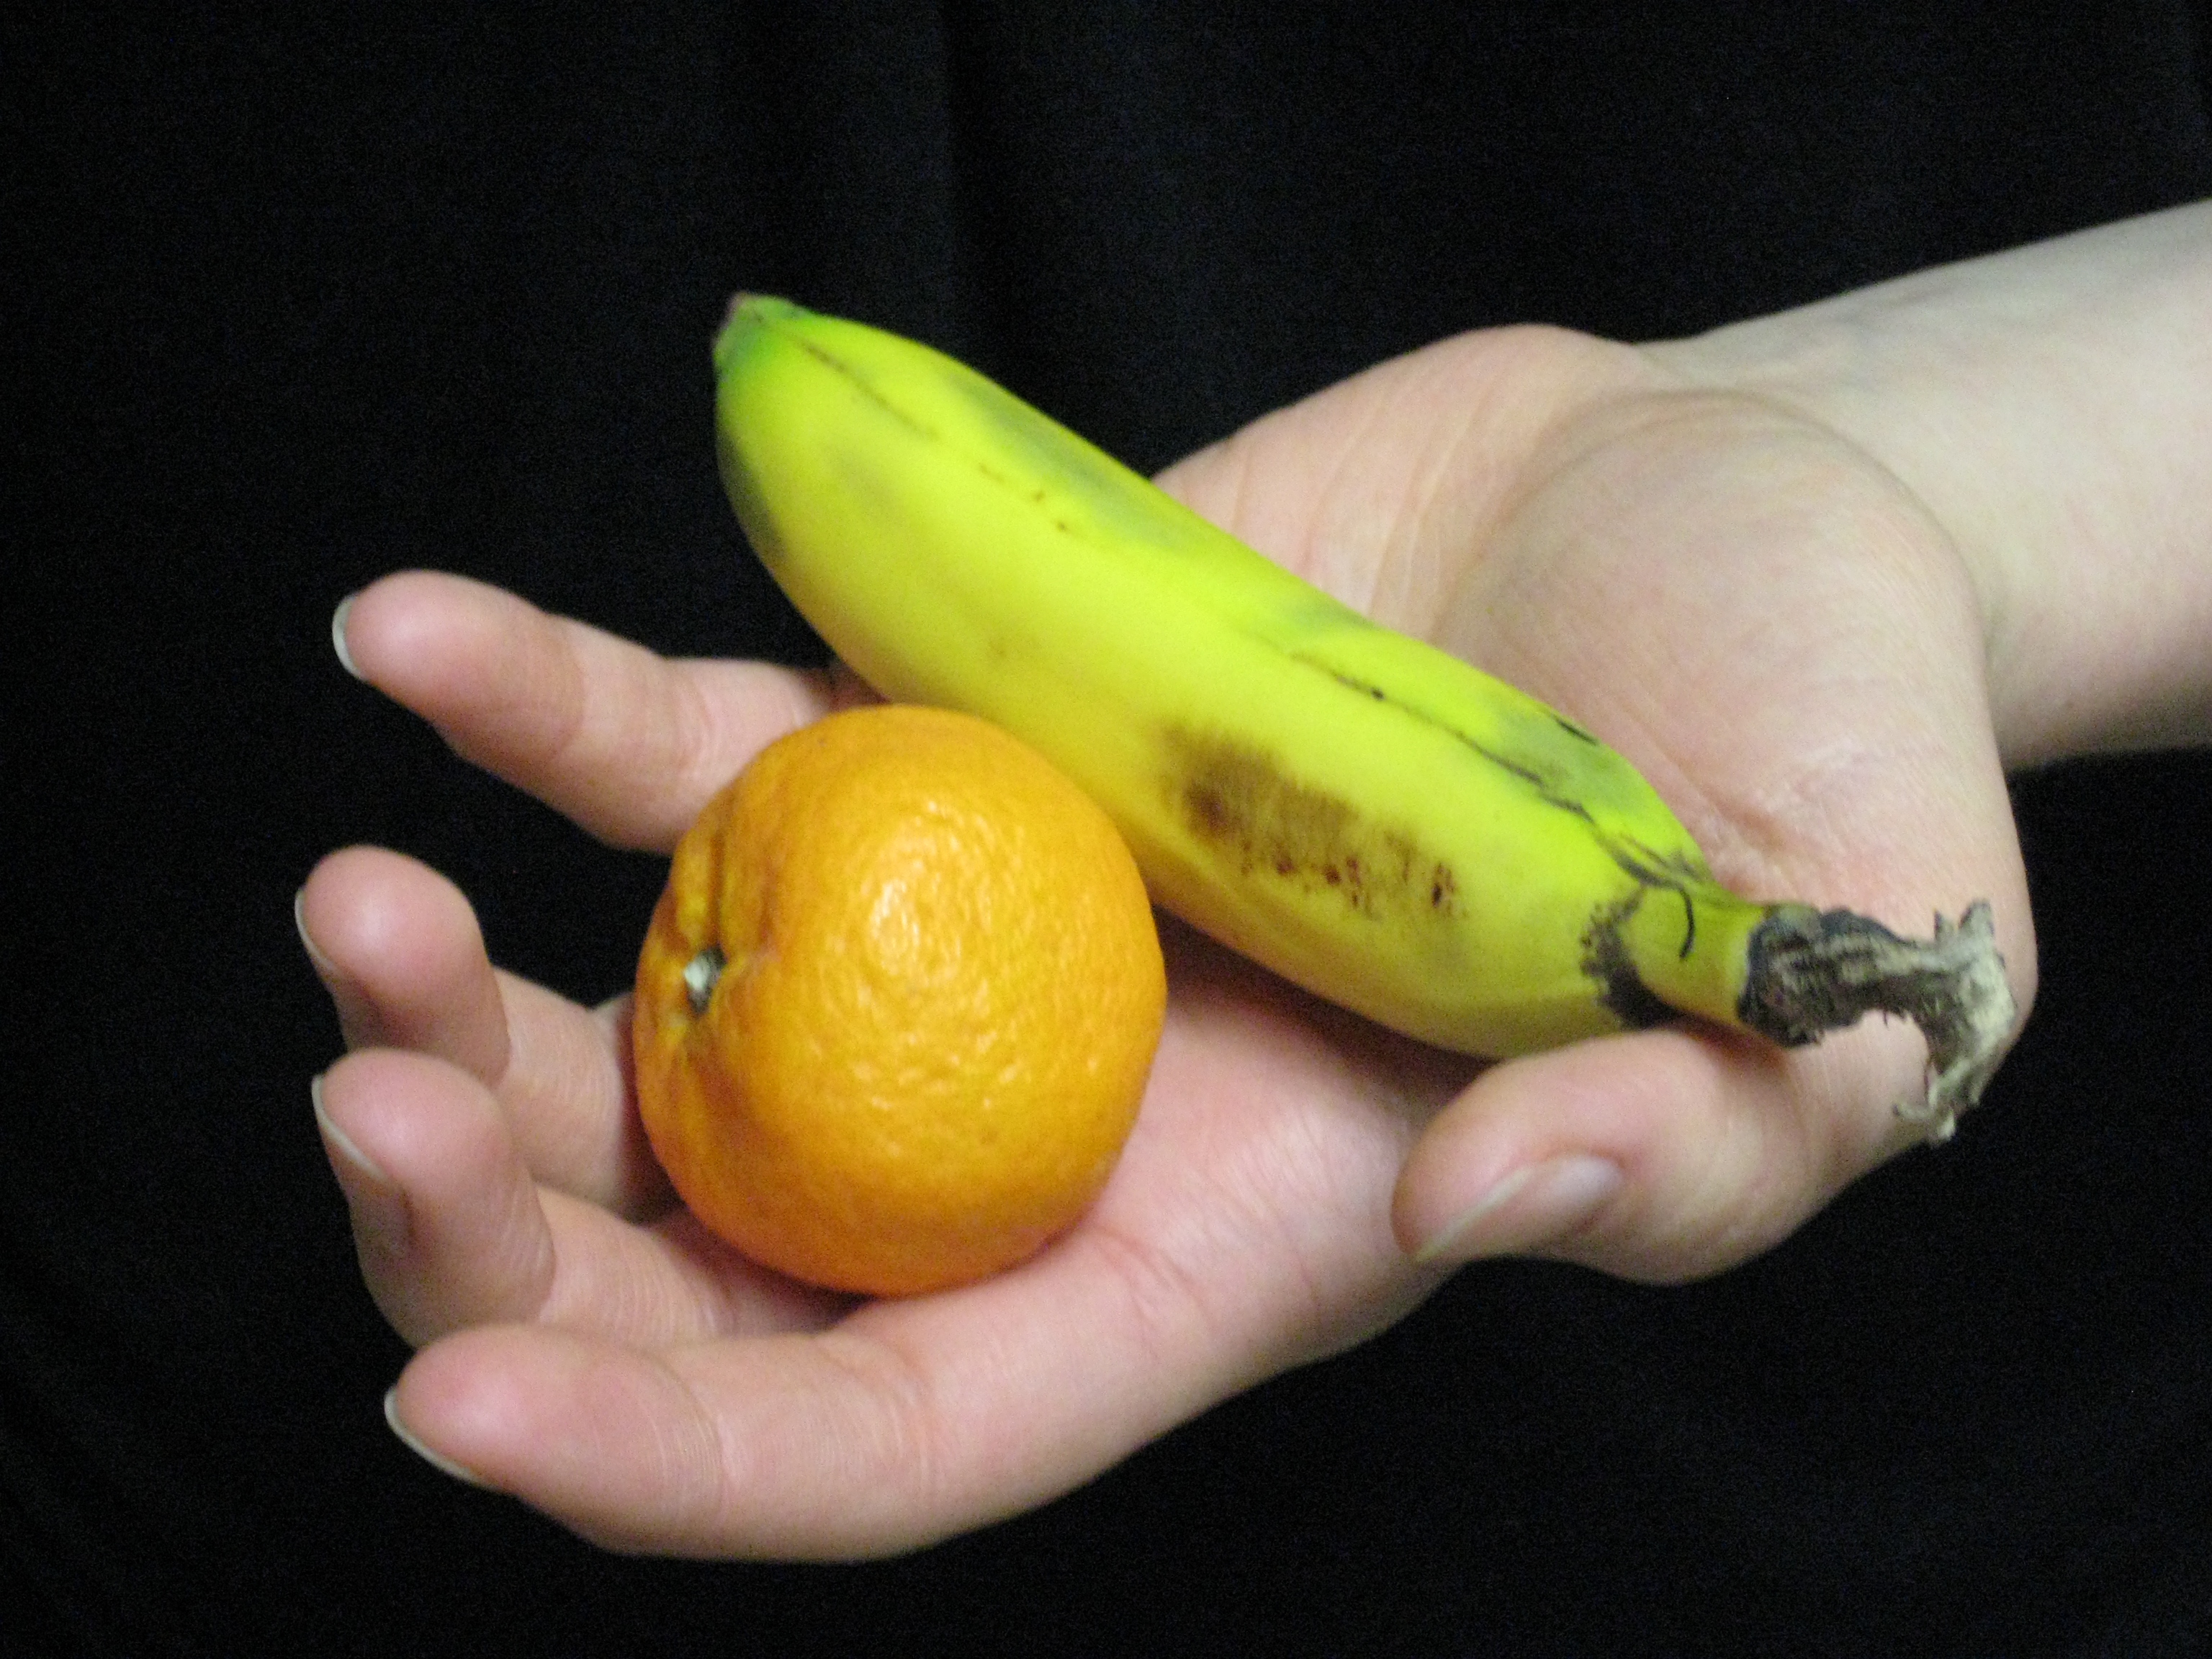 Tiny Fruit, or Giant Person? | Real Life Artist